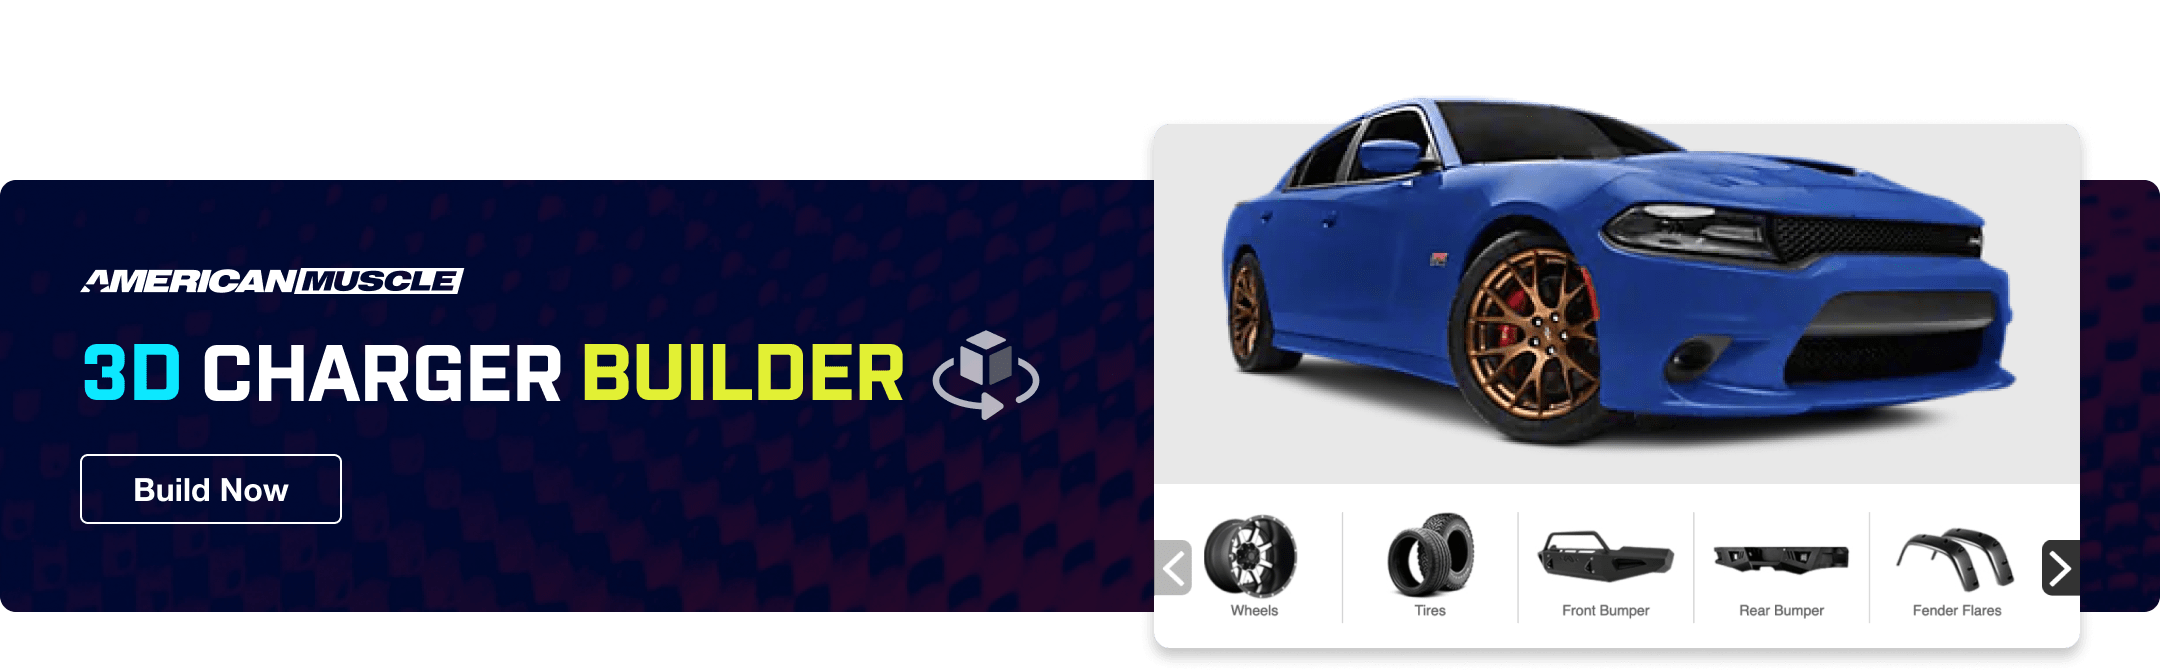 Charger Builder